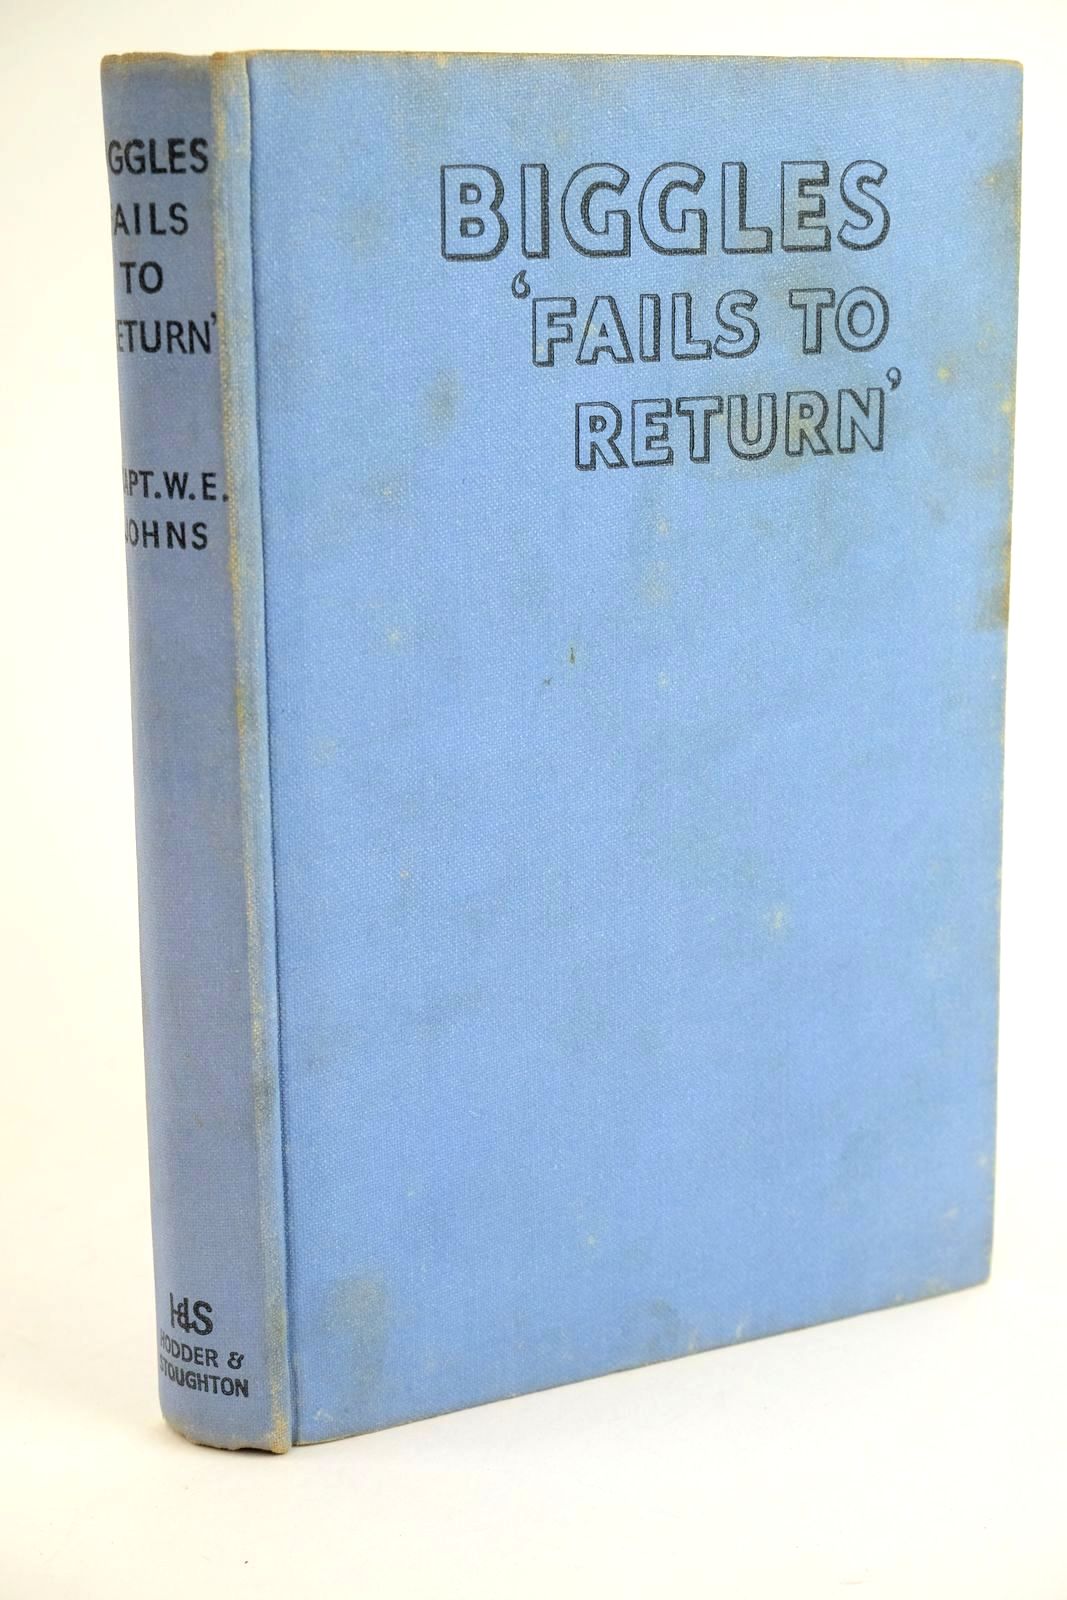 Photo of BIGGLES FAILS TO RETURN written by Johns, W.E. illustrated by Stead,  published by Hodder & Stoughton (STOCK CODE: 1323430)  for sale by Stella & Rose's Books